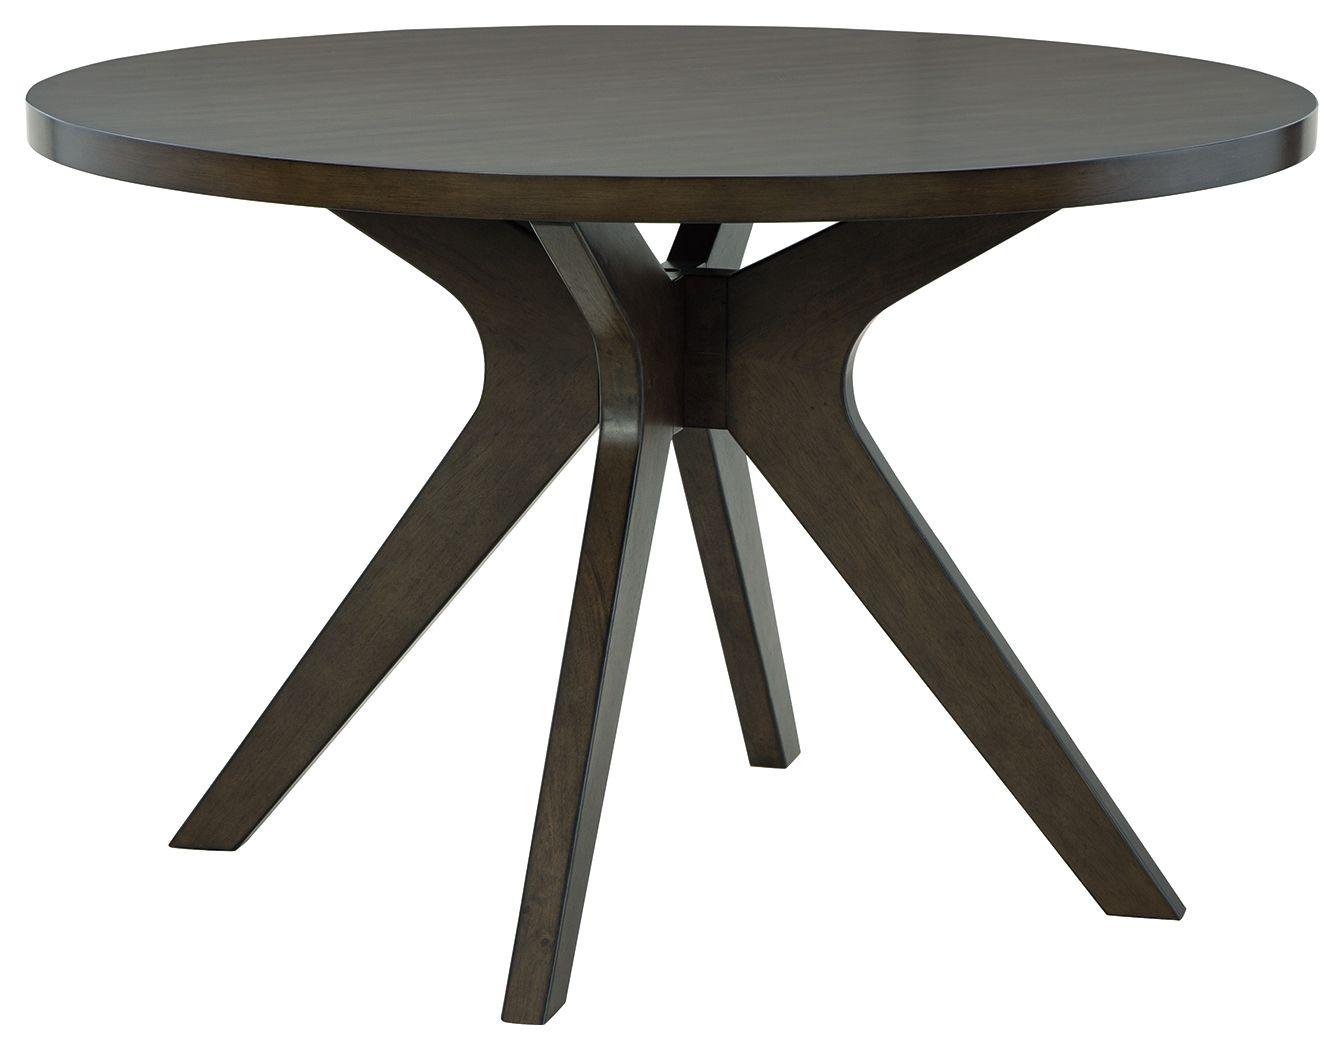 Signature Design by Ashley® - Wittland - Dark Brown - Round Dining Room Table - 5th Avenue Furniture